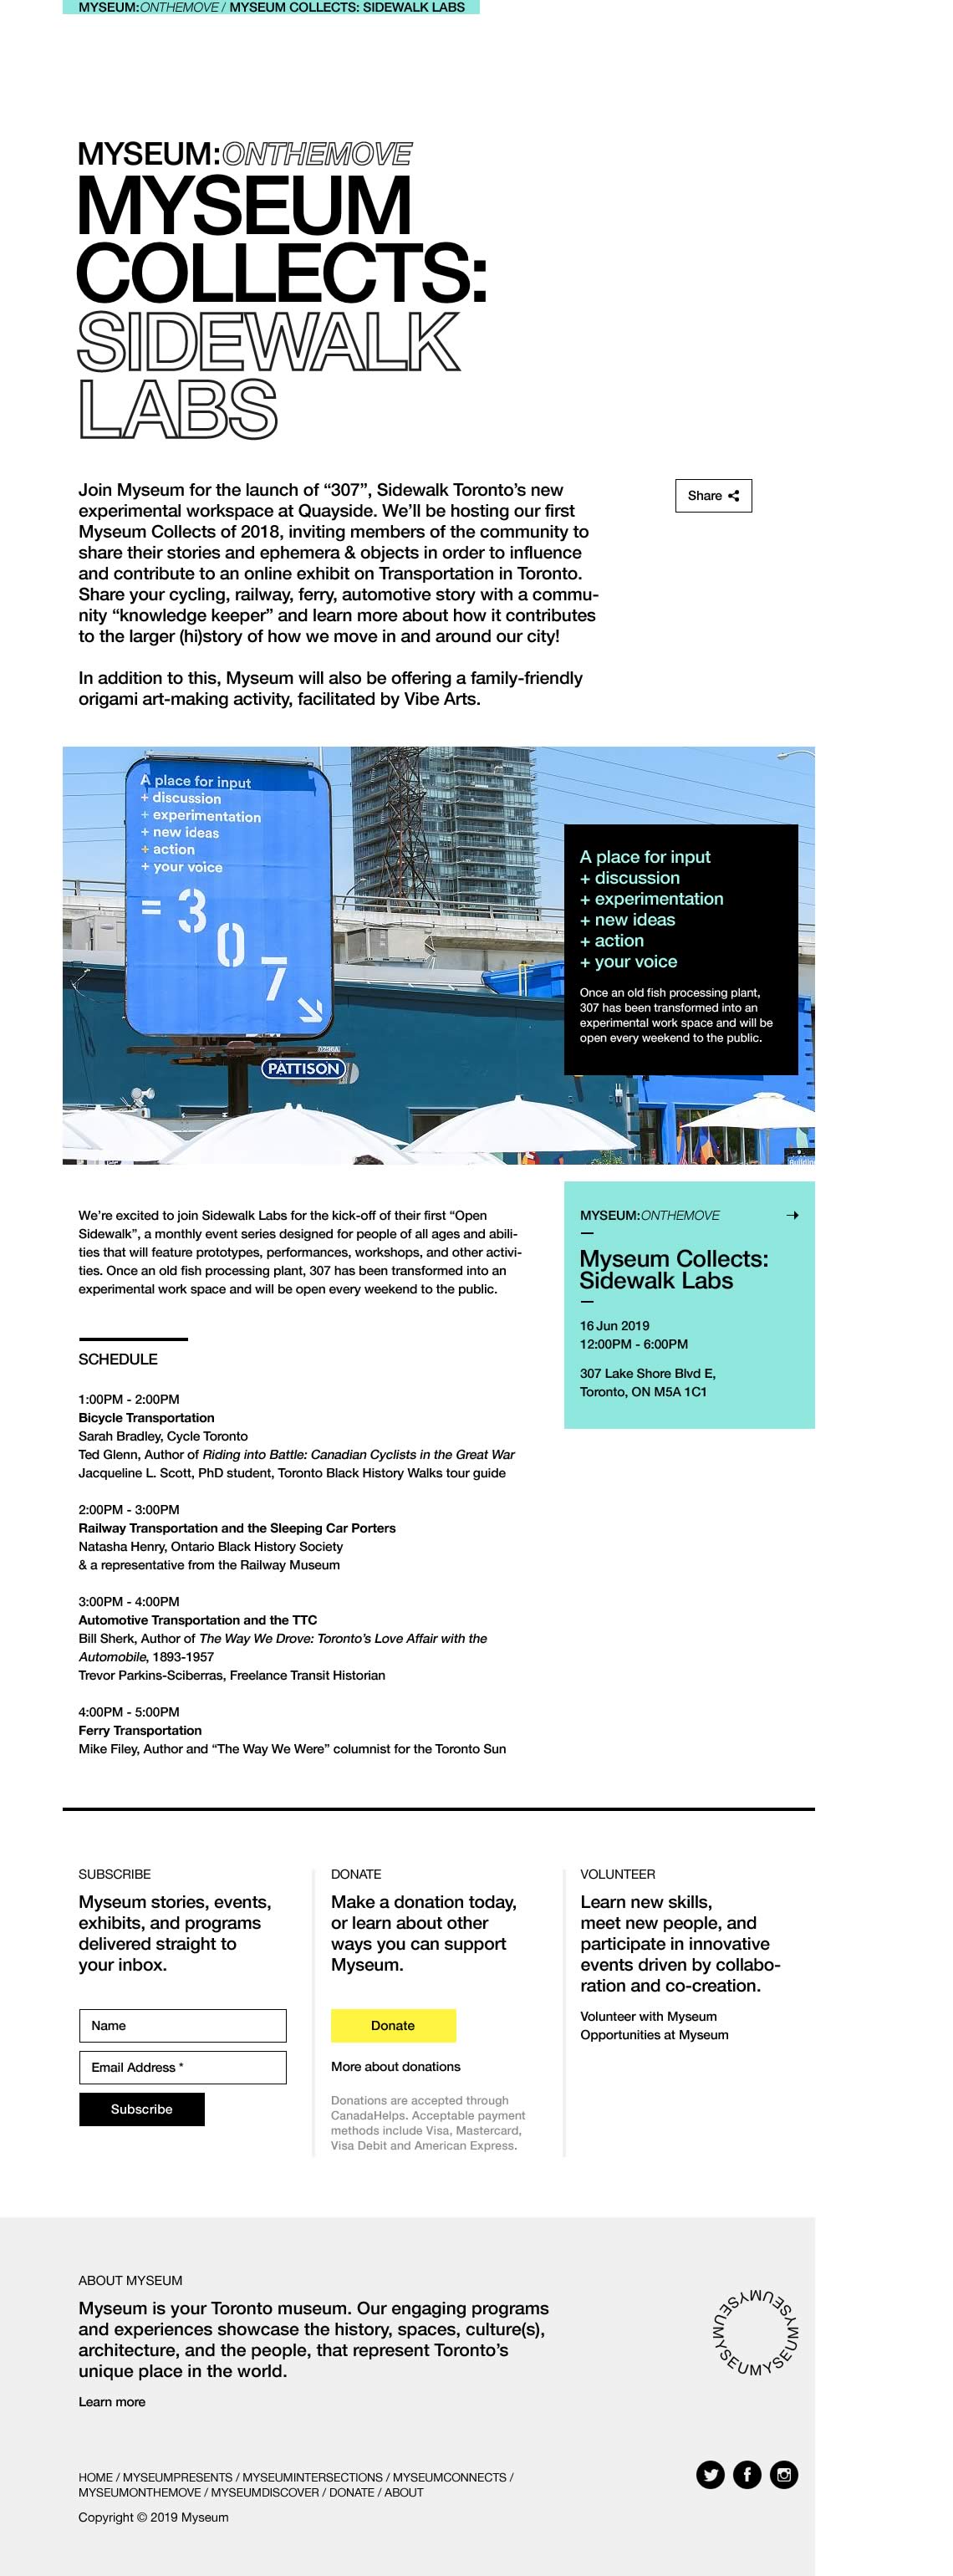 Capture of the full 'MYSEUM COLLECTS: SIDEWALK LABS' event detail page from the Myseum website